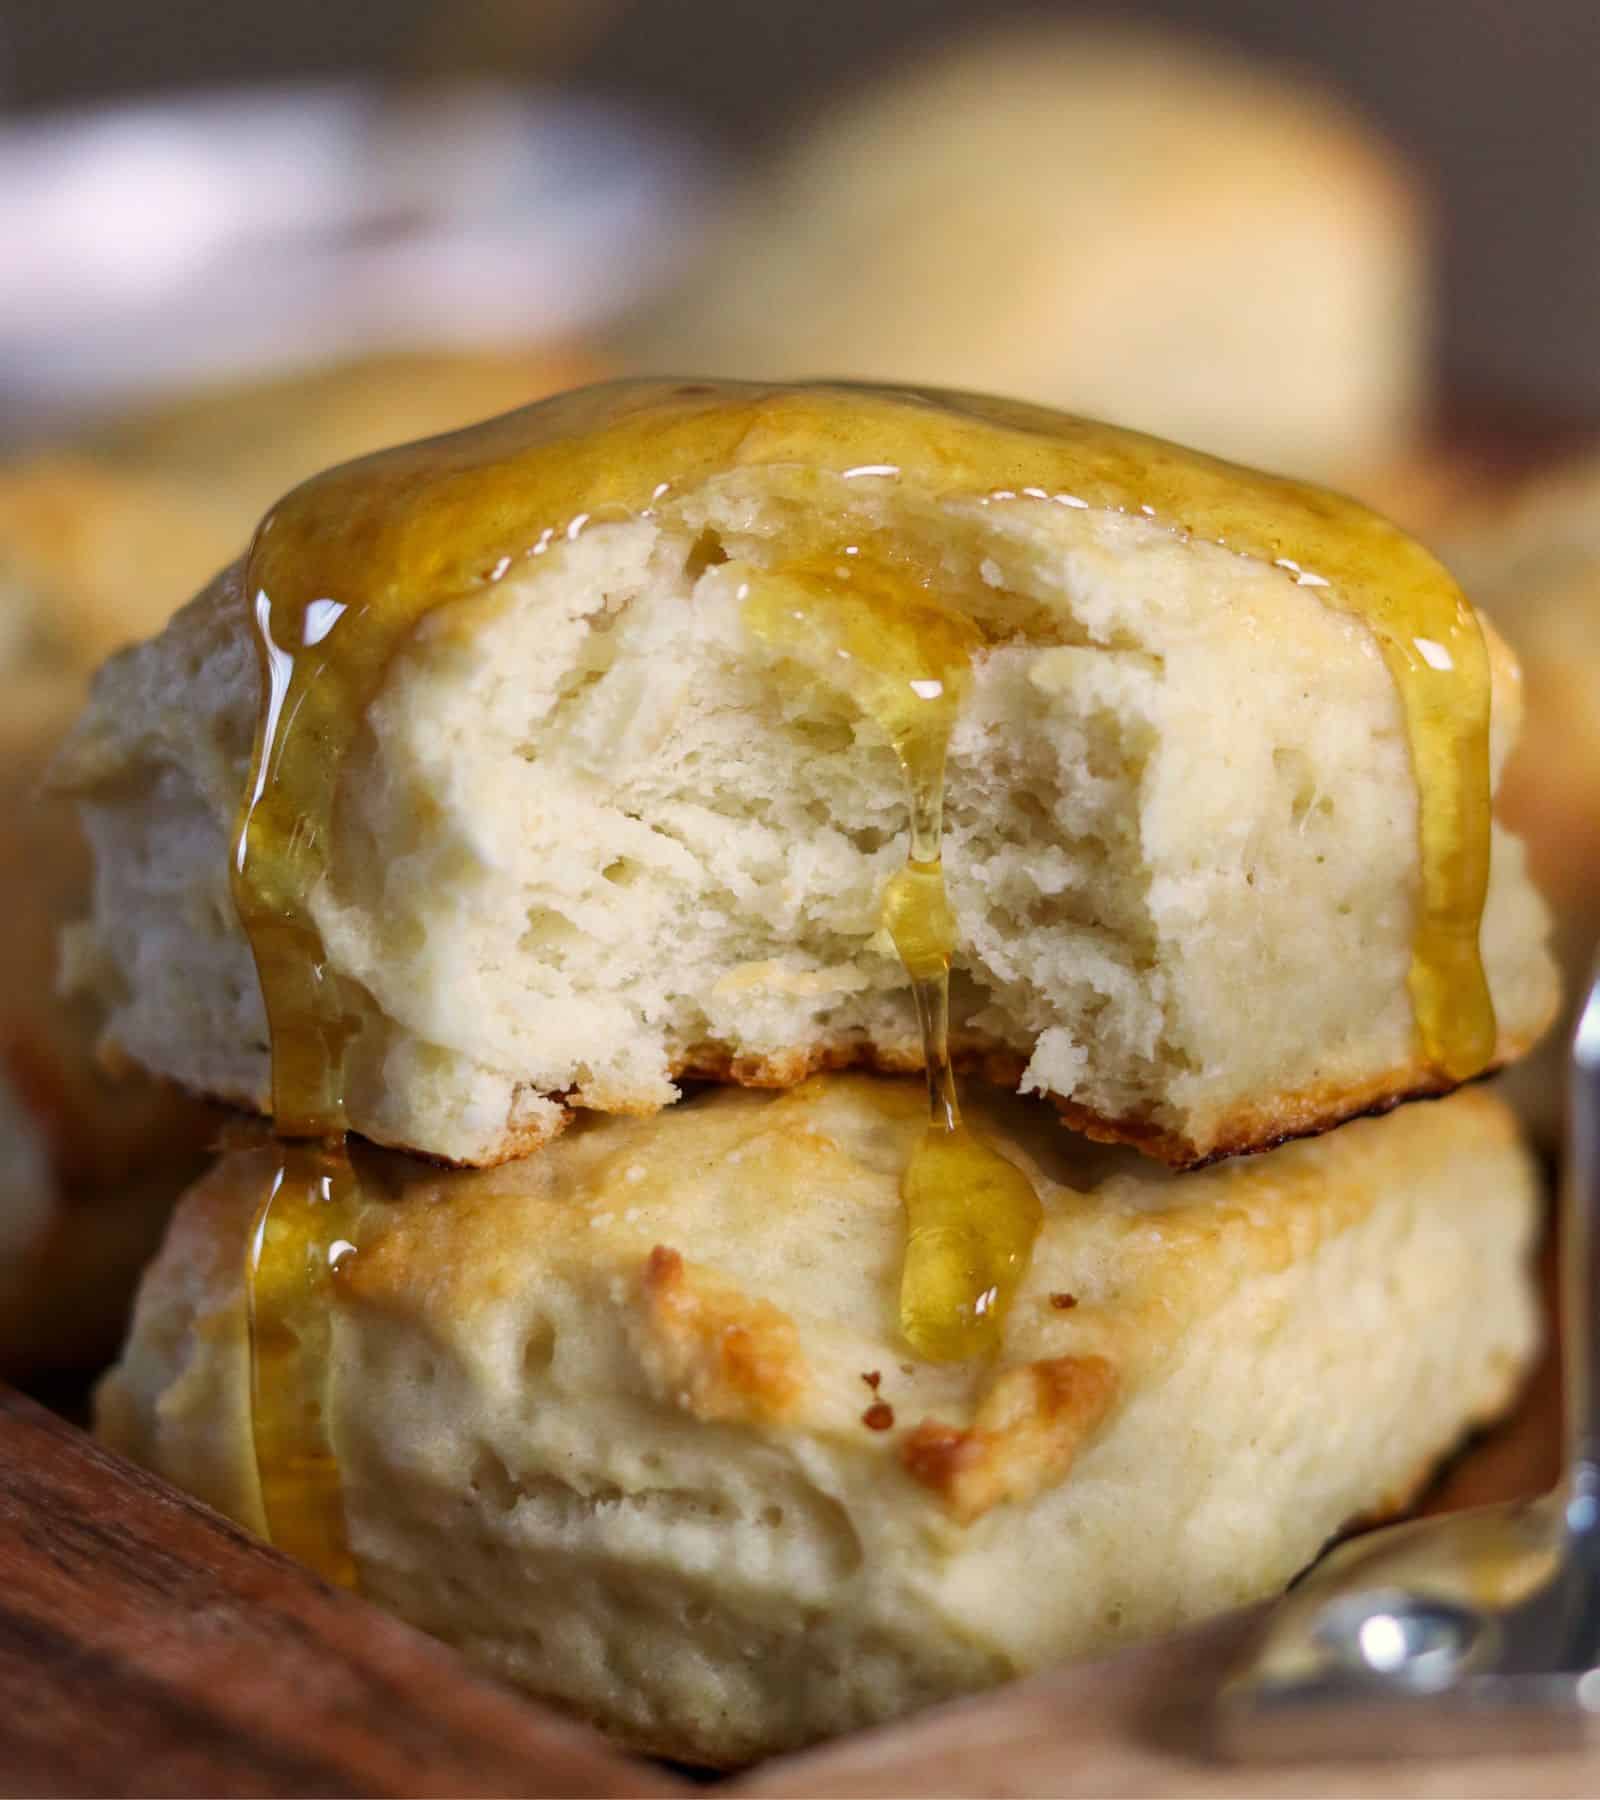 Clever Idea: Make Perfectly Round Breakfast Biscuit Eggs Using